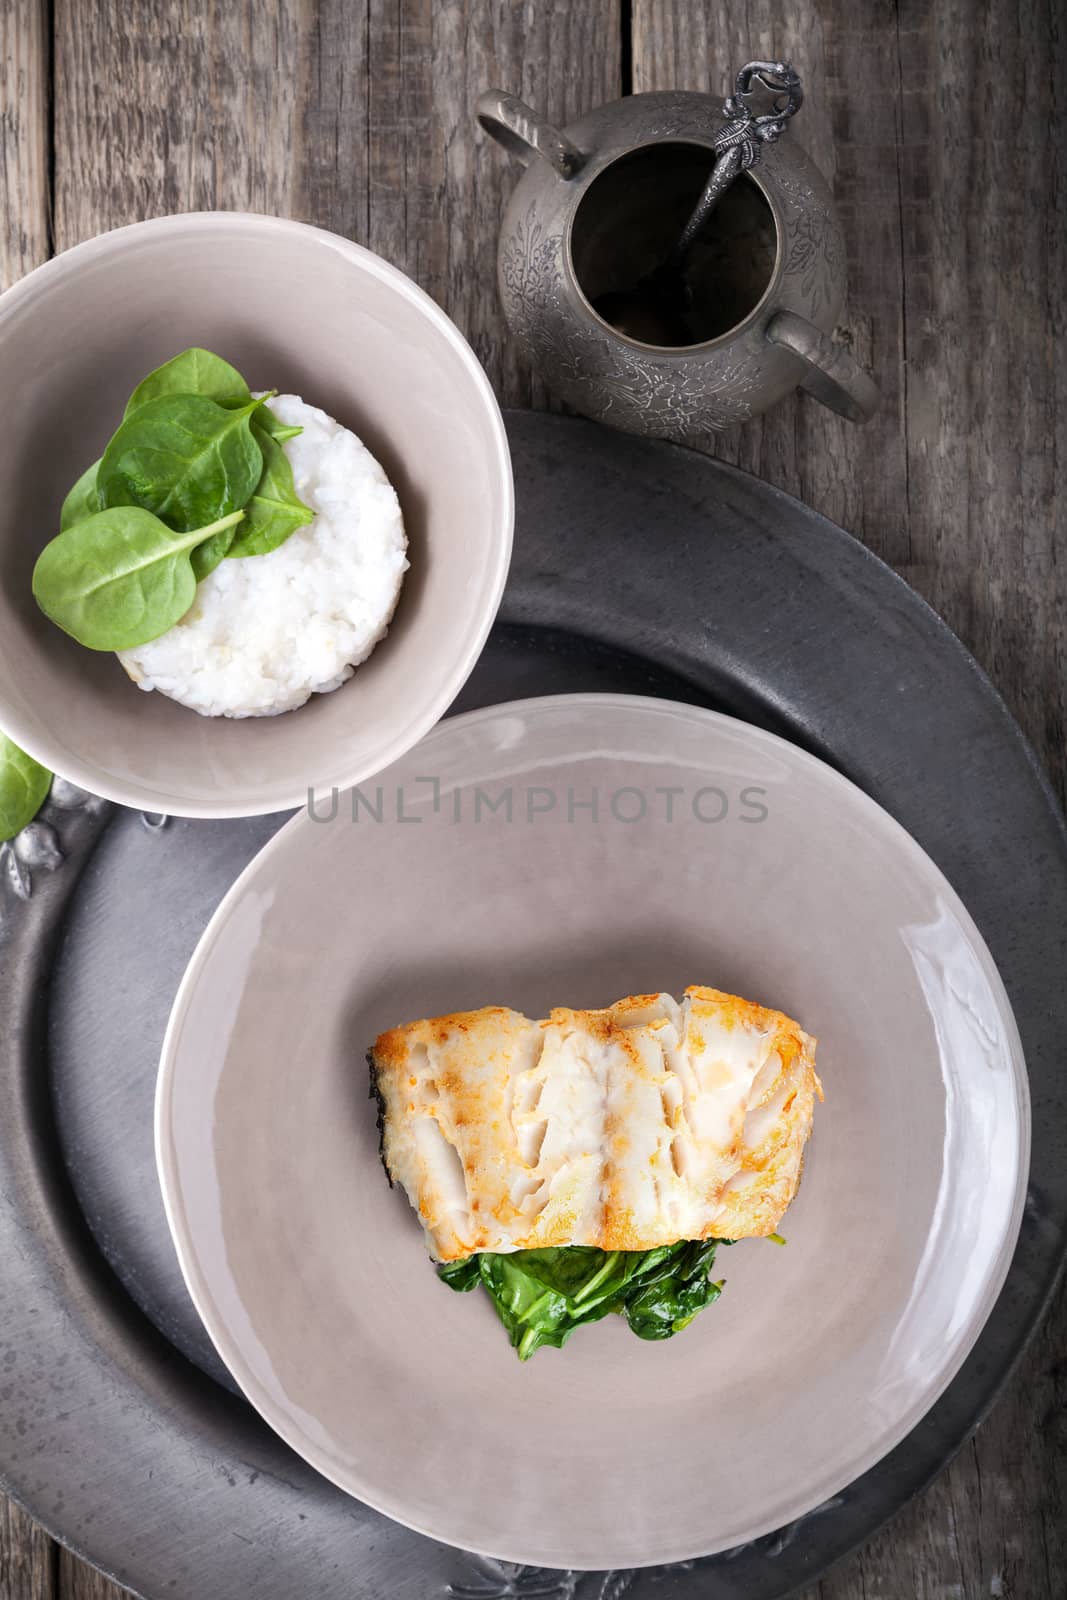 Fried cod fillets and spinach by supercat67